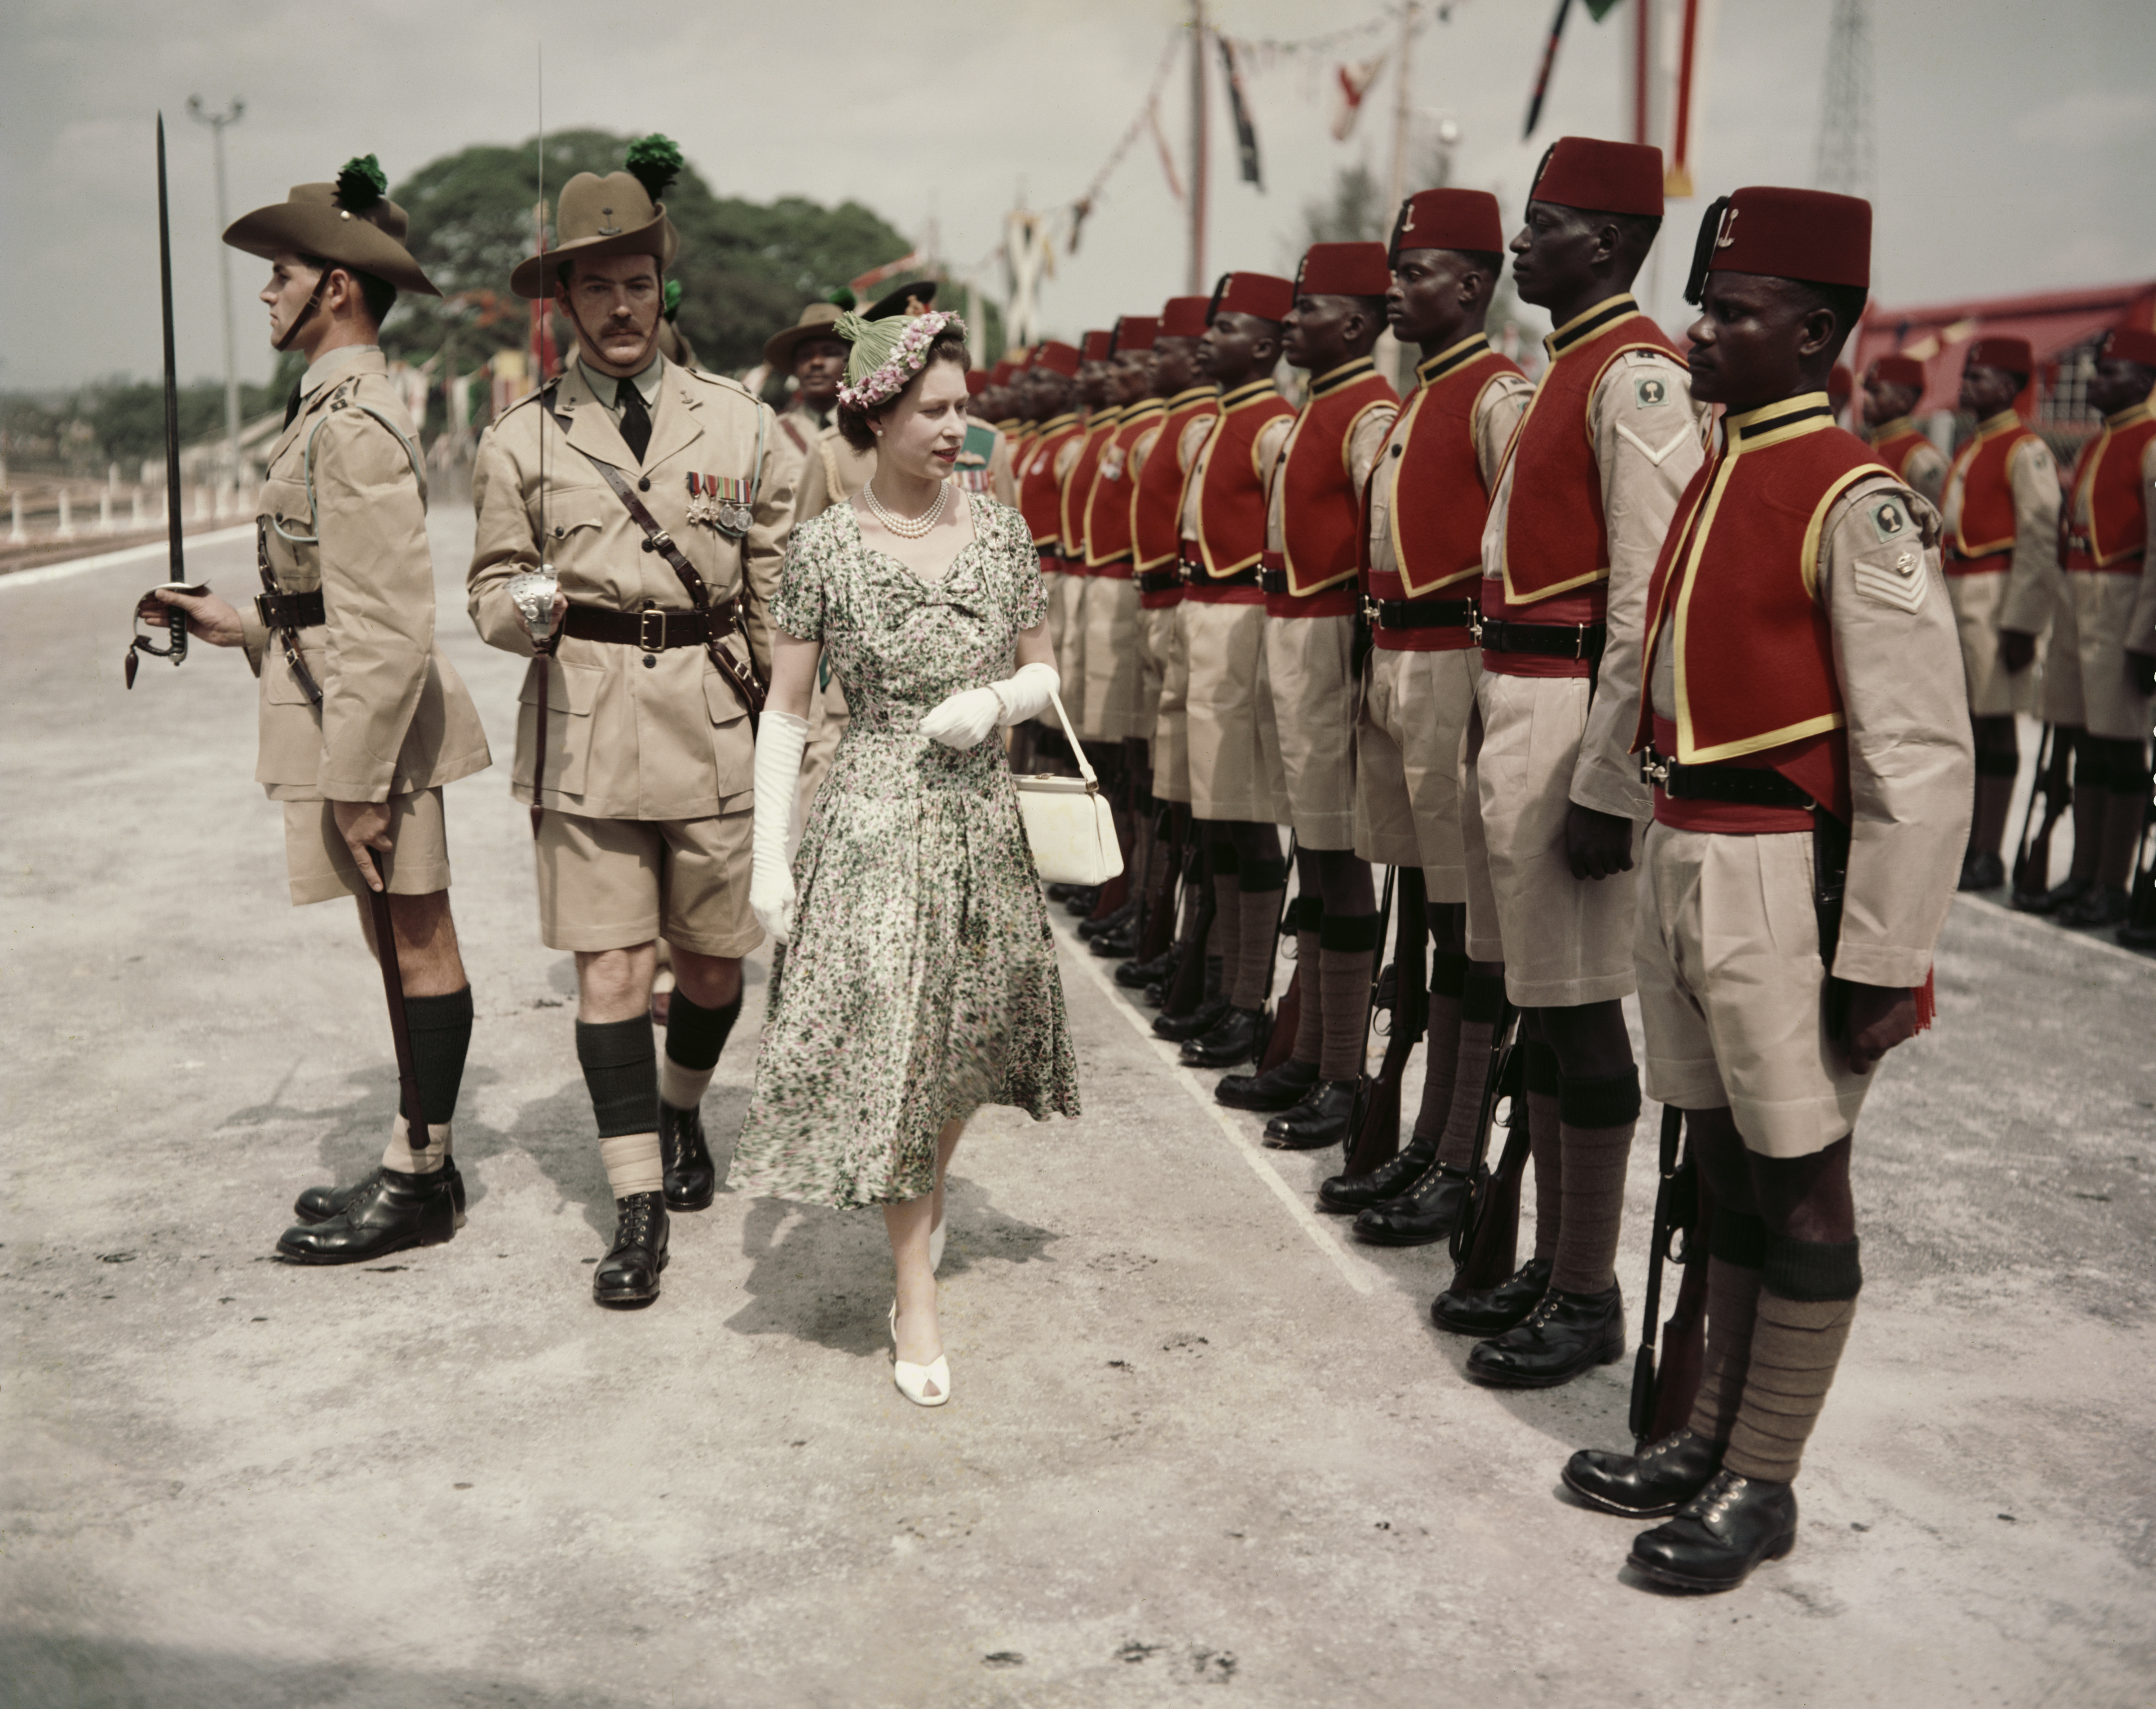 Queen Elizabeth II inspects men of the newly-renamed Queen's Own Nigeria Regiment, Royal West African Frontier Force, at Kaduna Airport, Nigeria, during her Commonwealth Tour, 2nd February 1956. (Photo by Fox Photos/Hulton Archive/Getty Images) (Getty Images—2012 Getty Images)